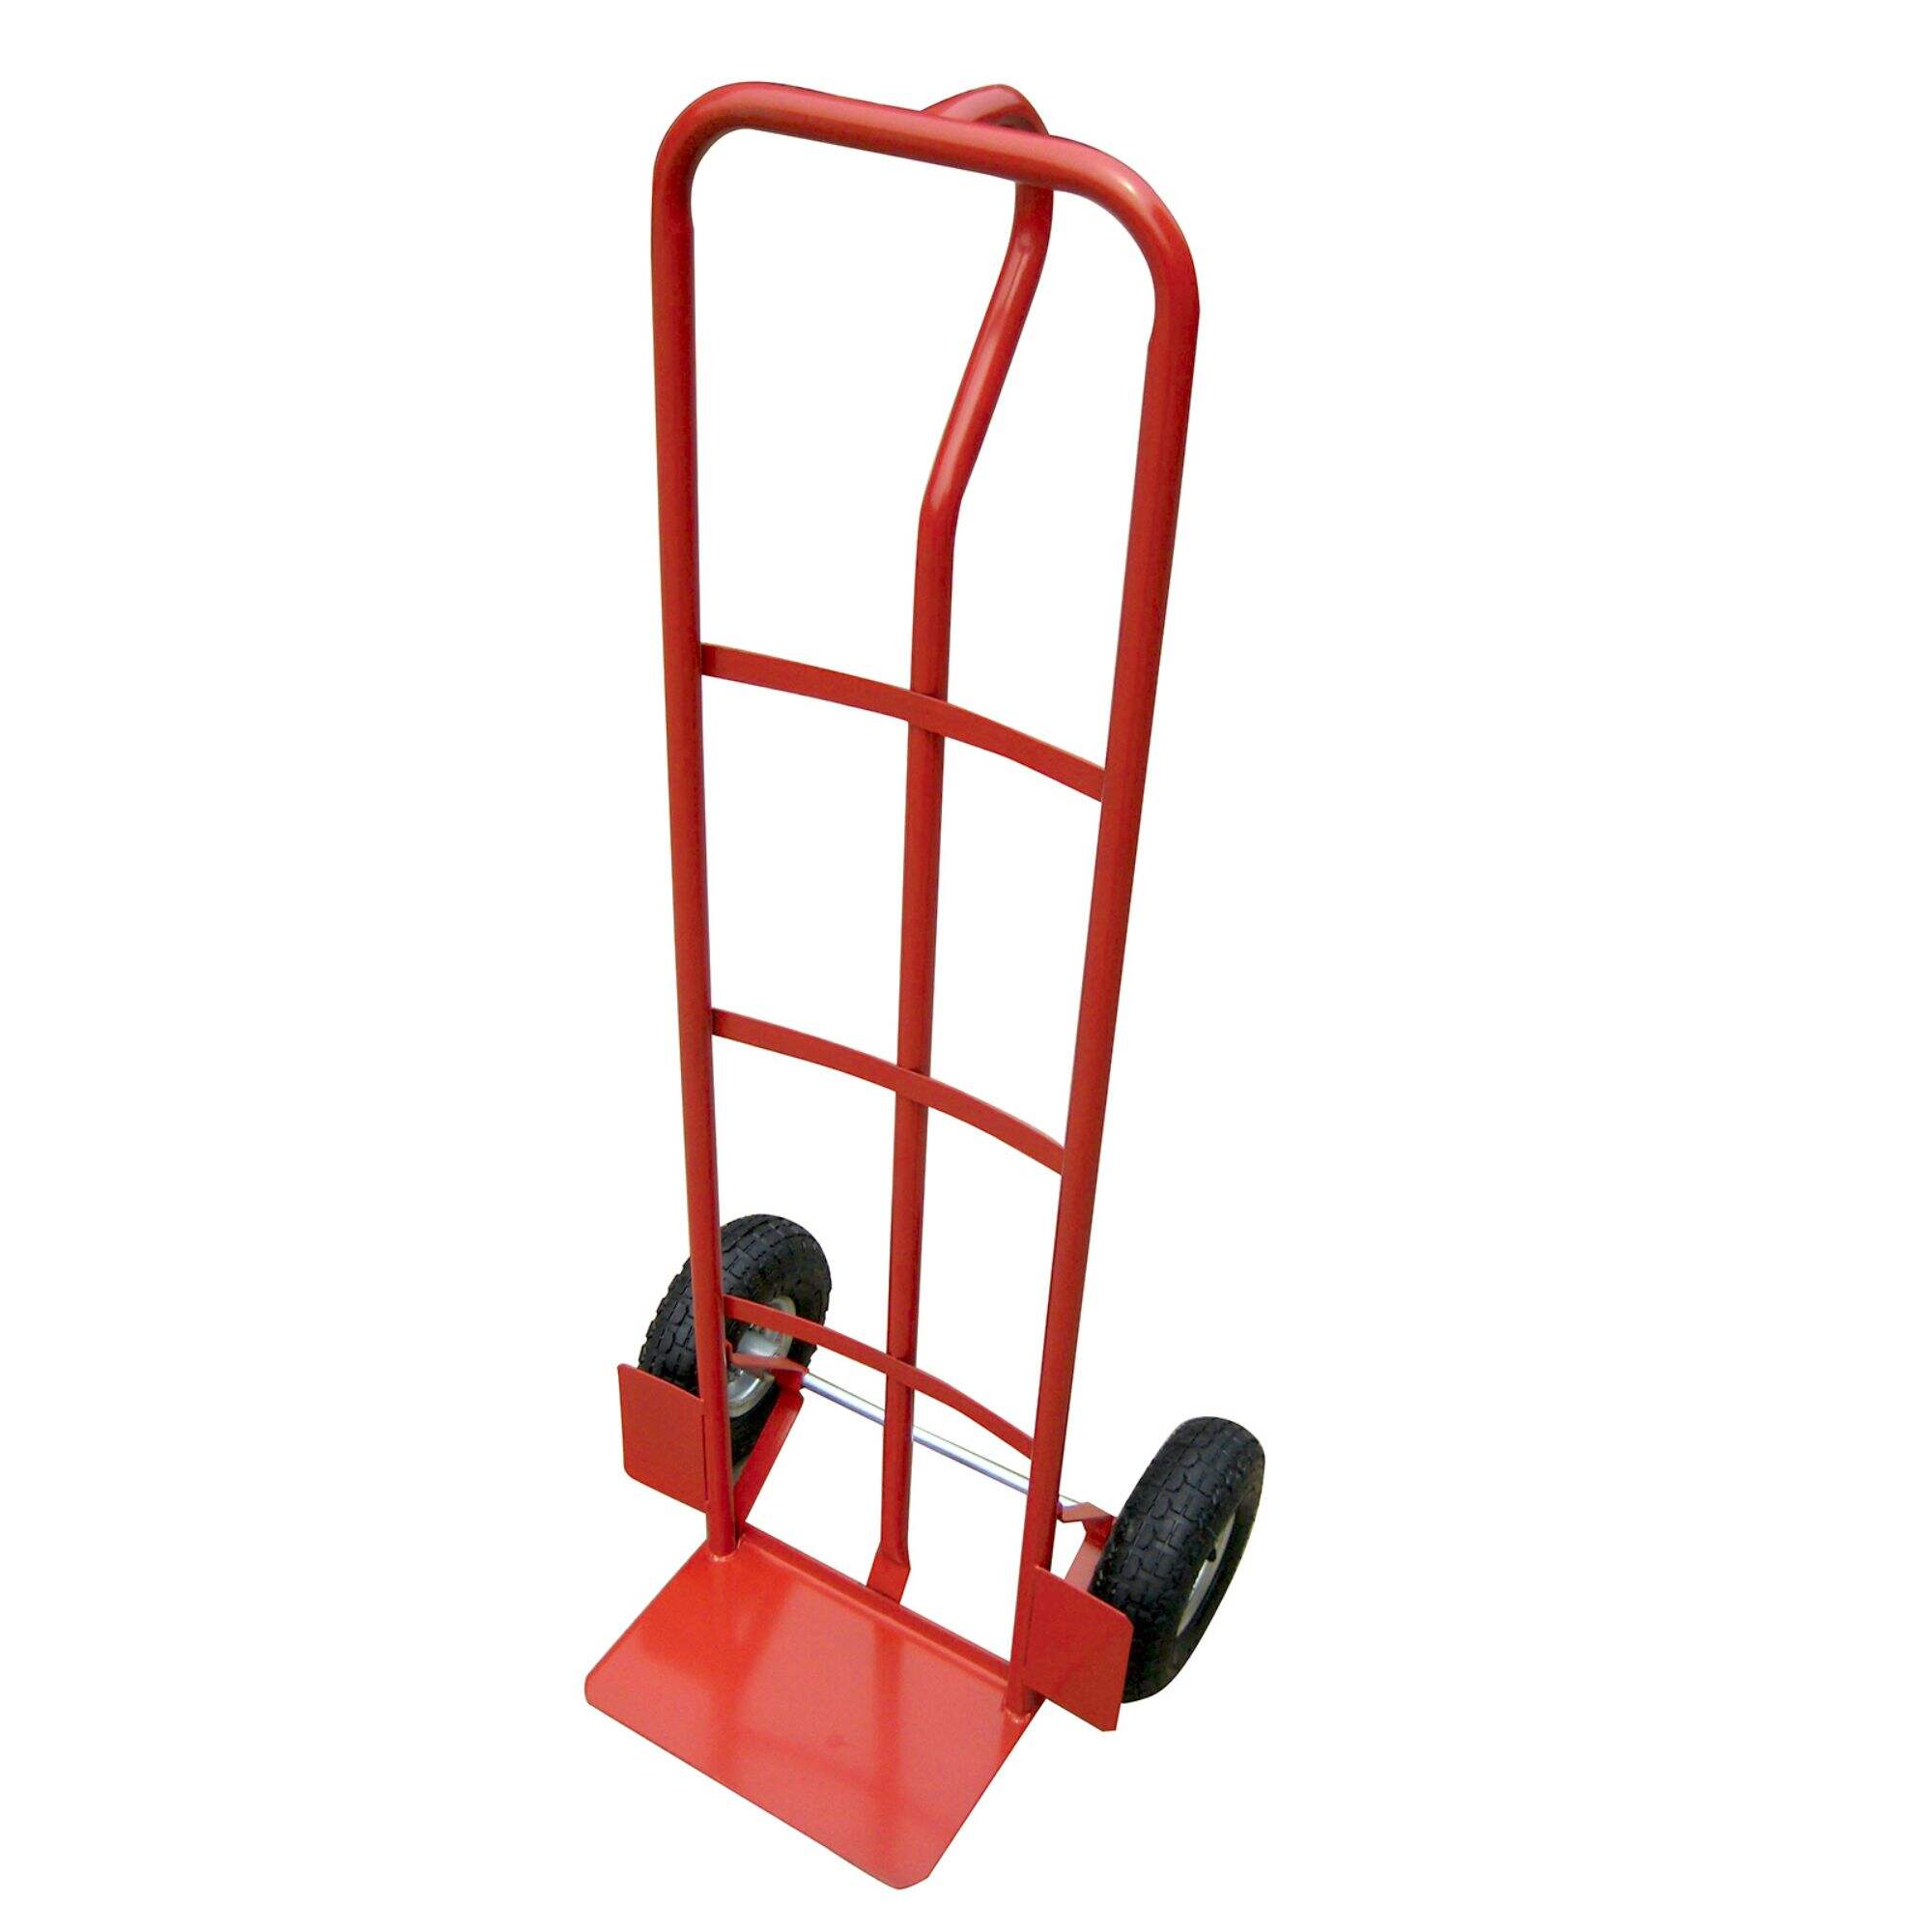 HT1815 Steel Hand Truck, Hand Cart Trolley Dolly, with 10